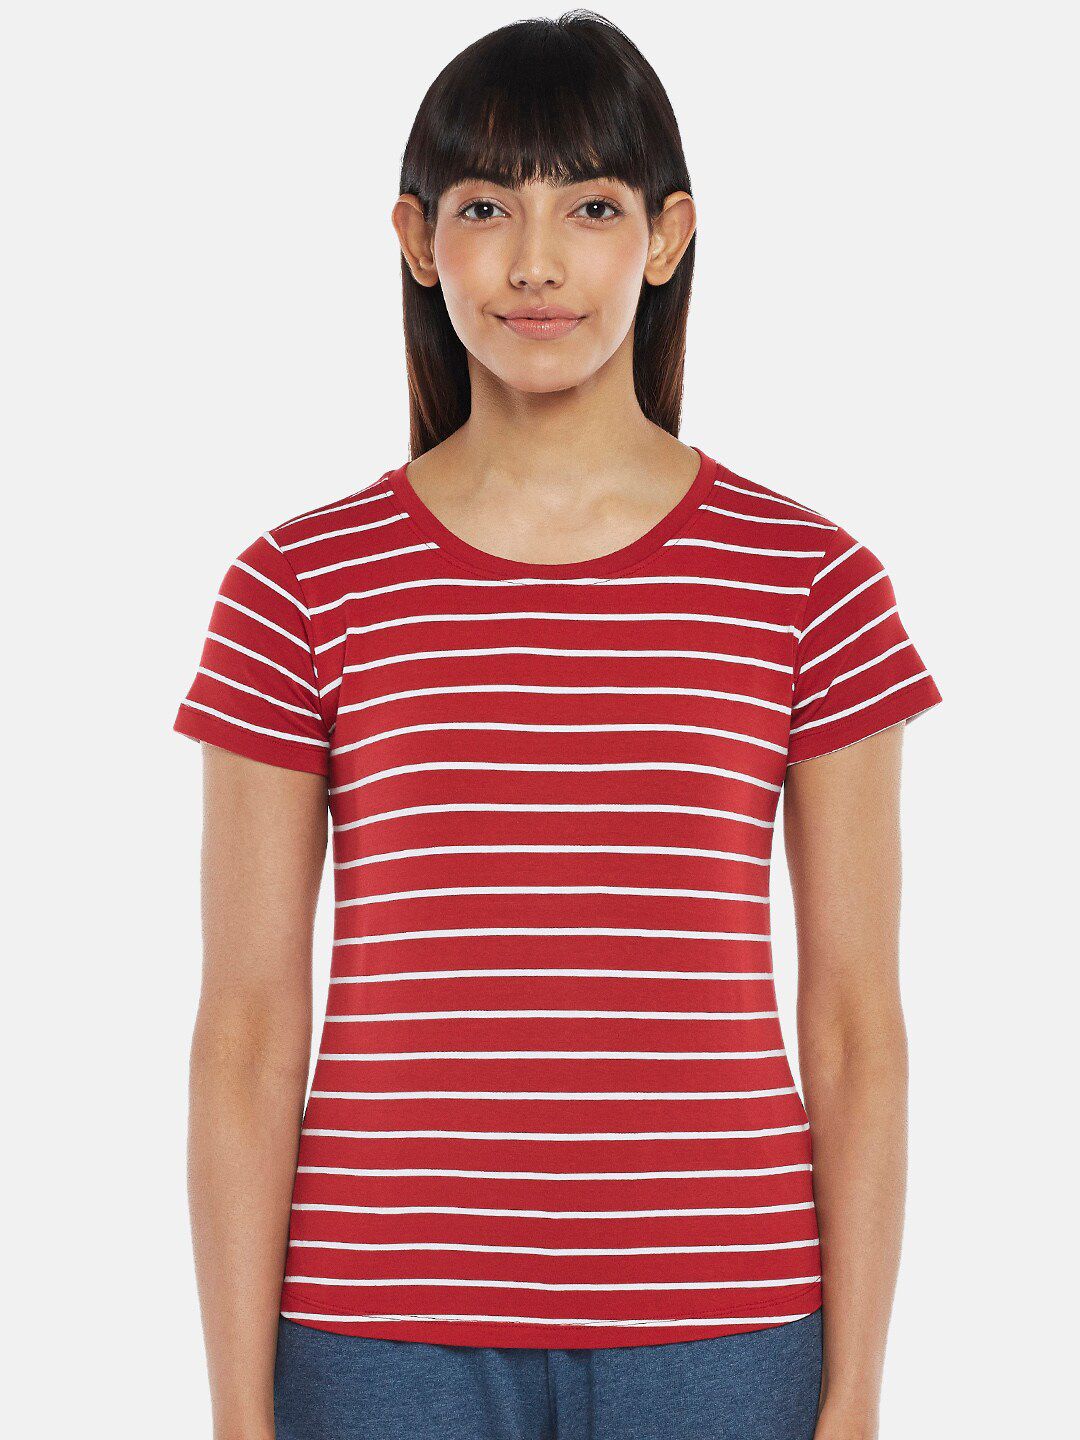 Dreamz by Pantaloons Red Striped Top Price in India